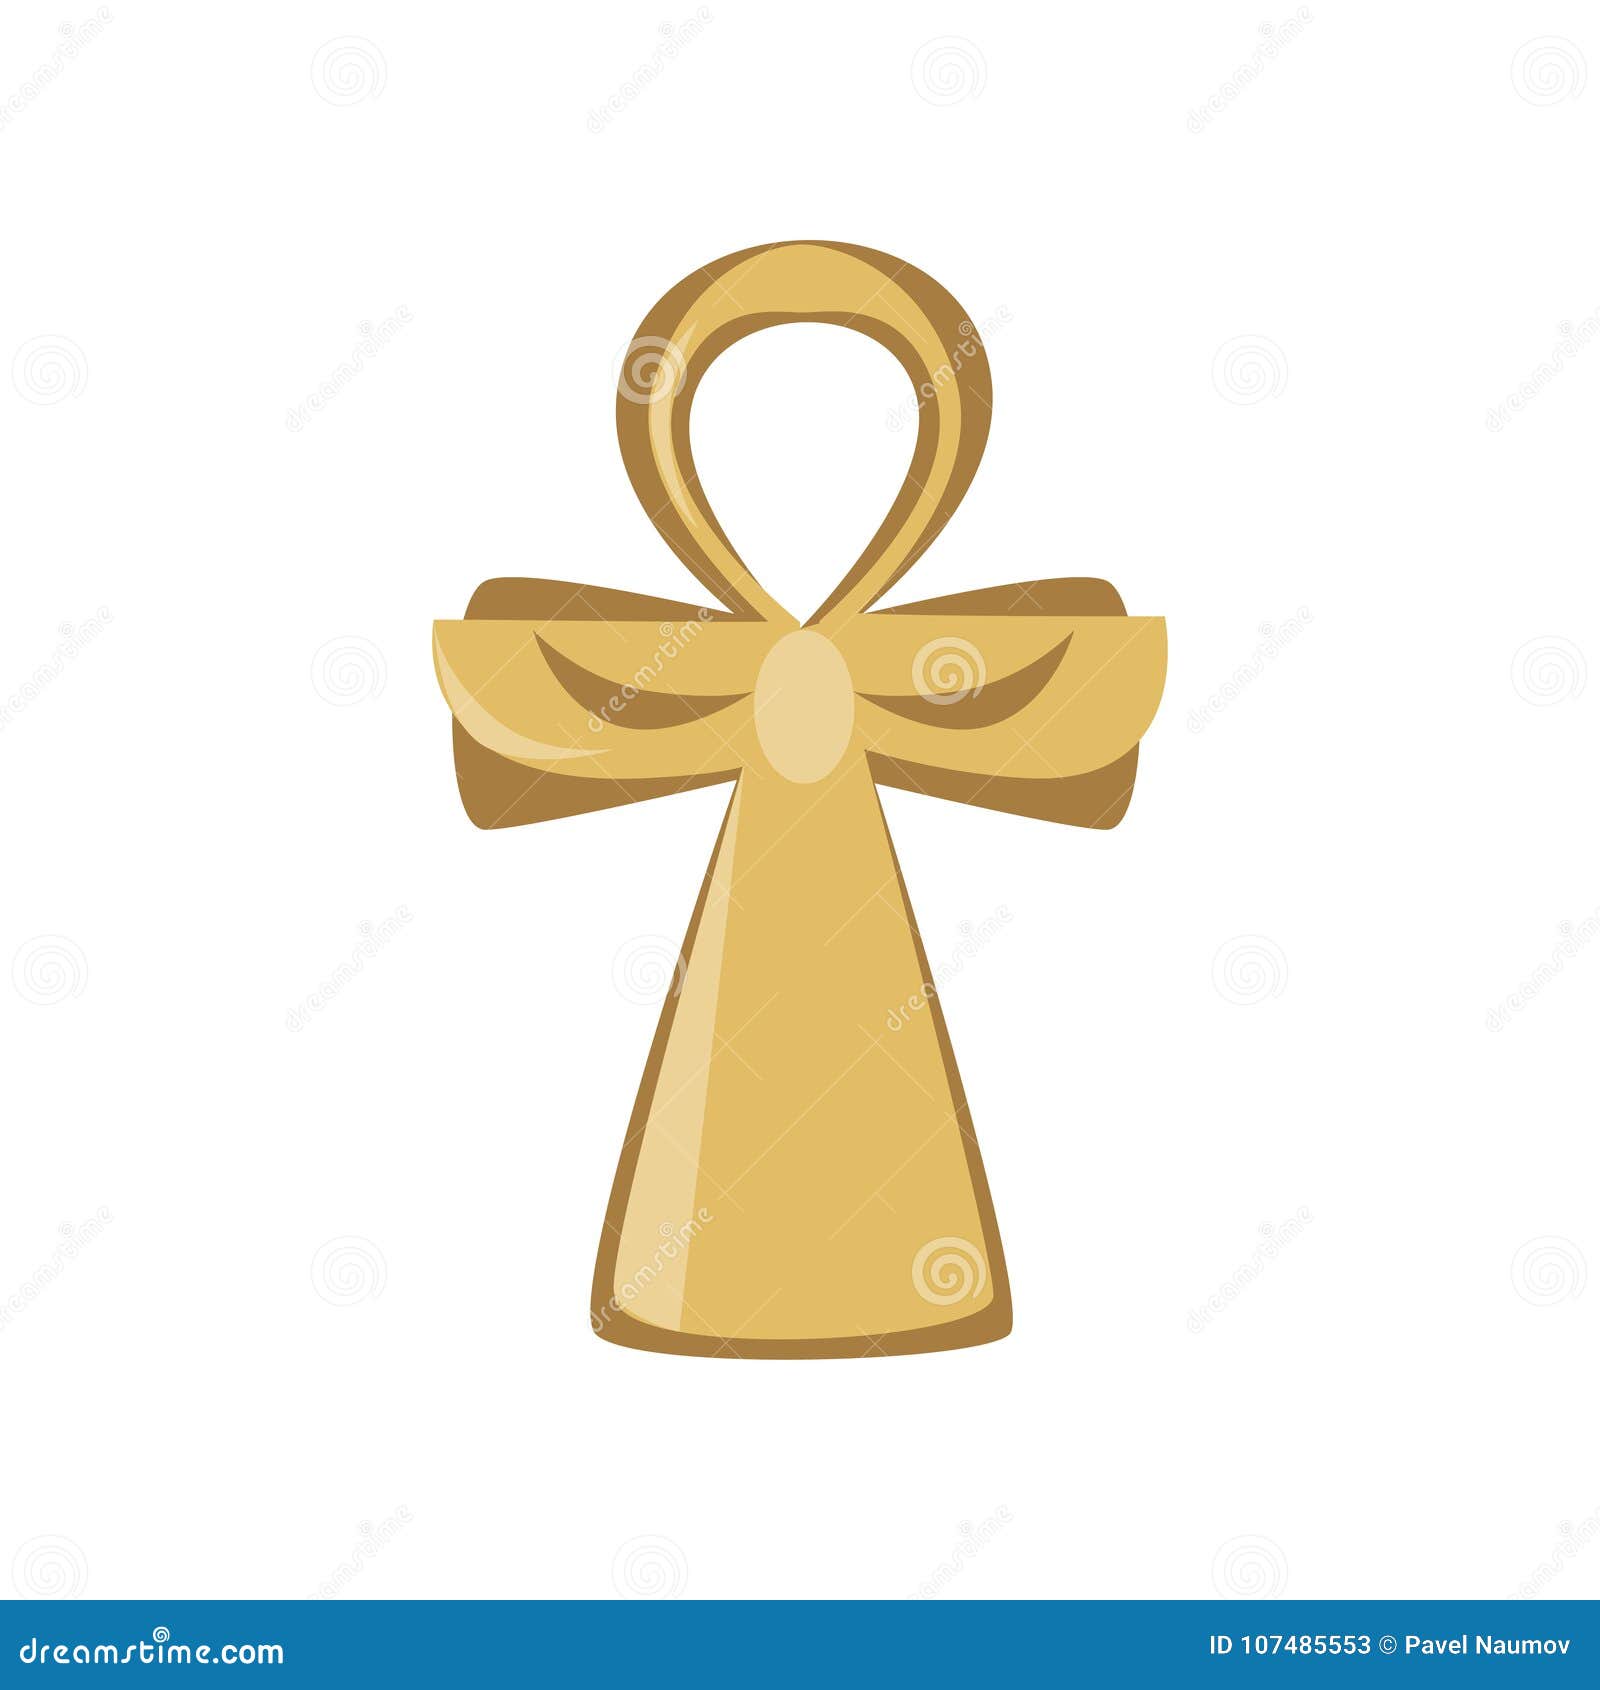 Ankh Cross Religious Sign Of The Ancient Egypt Symbol Of Life